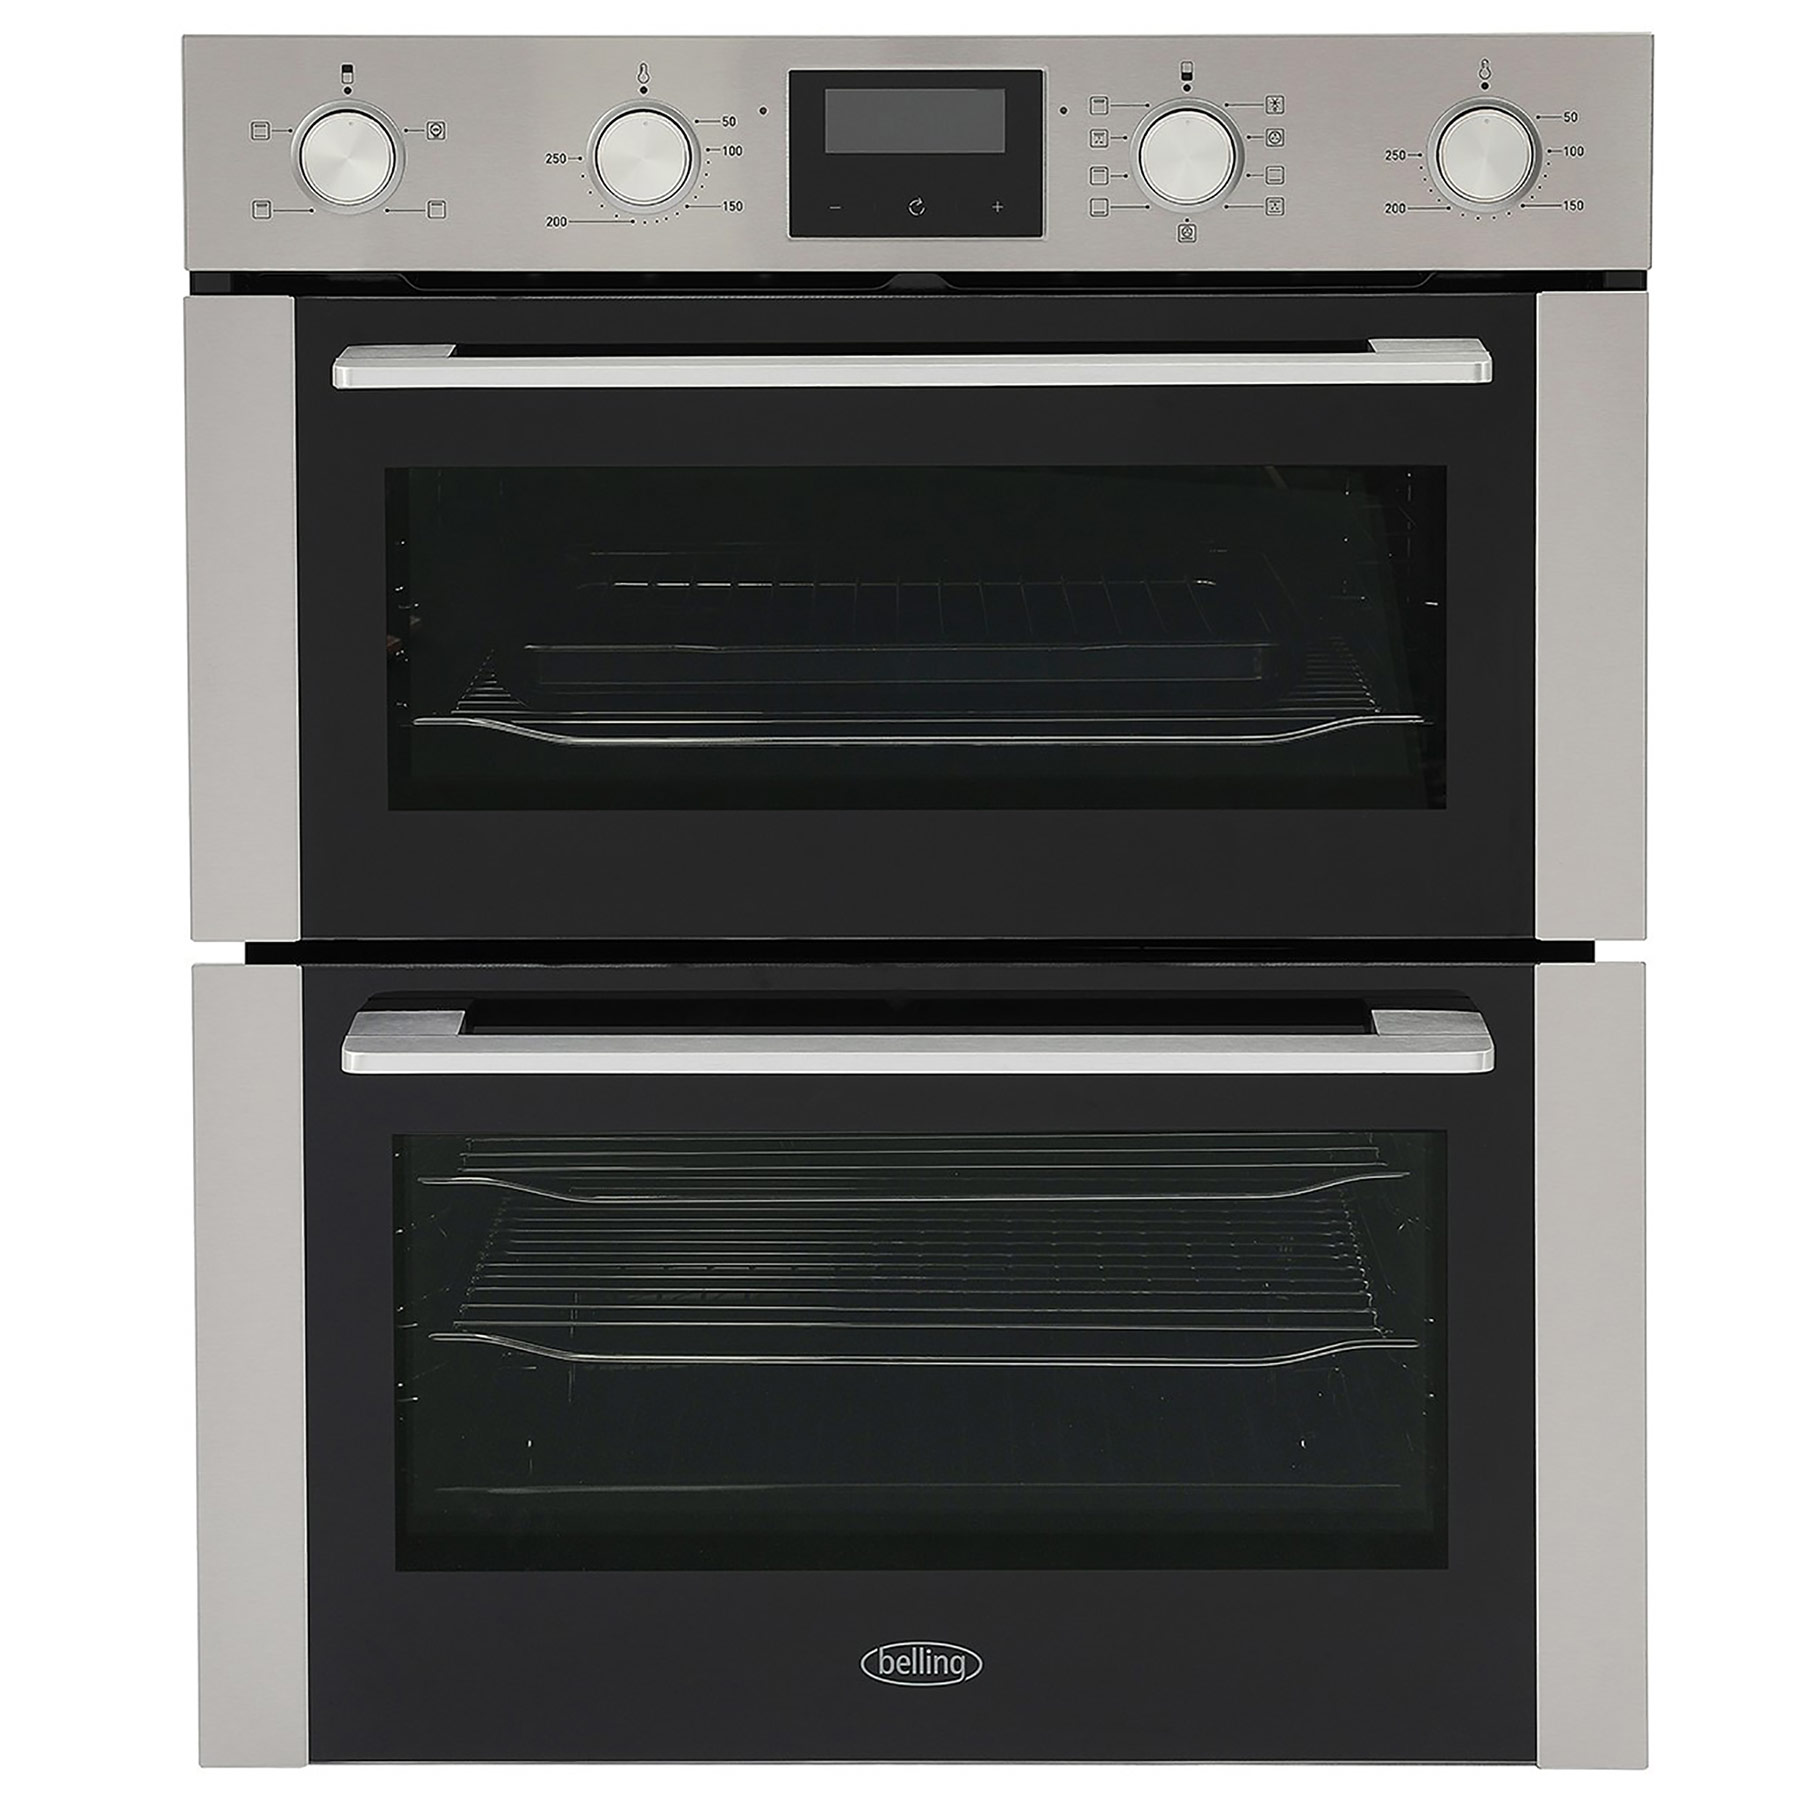 Belling 444411631 70cm Built Under Electric Double Oven Stainless Stee